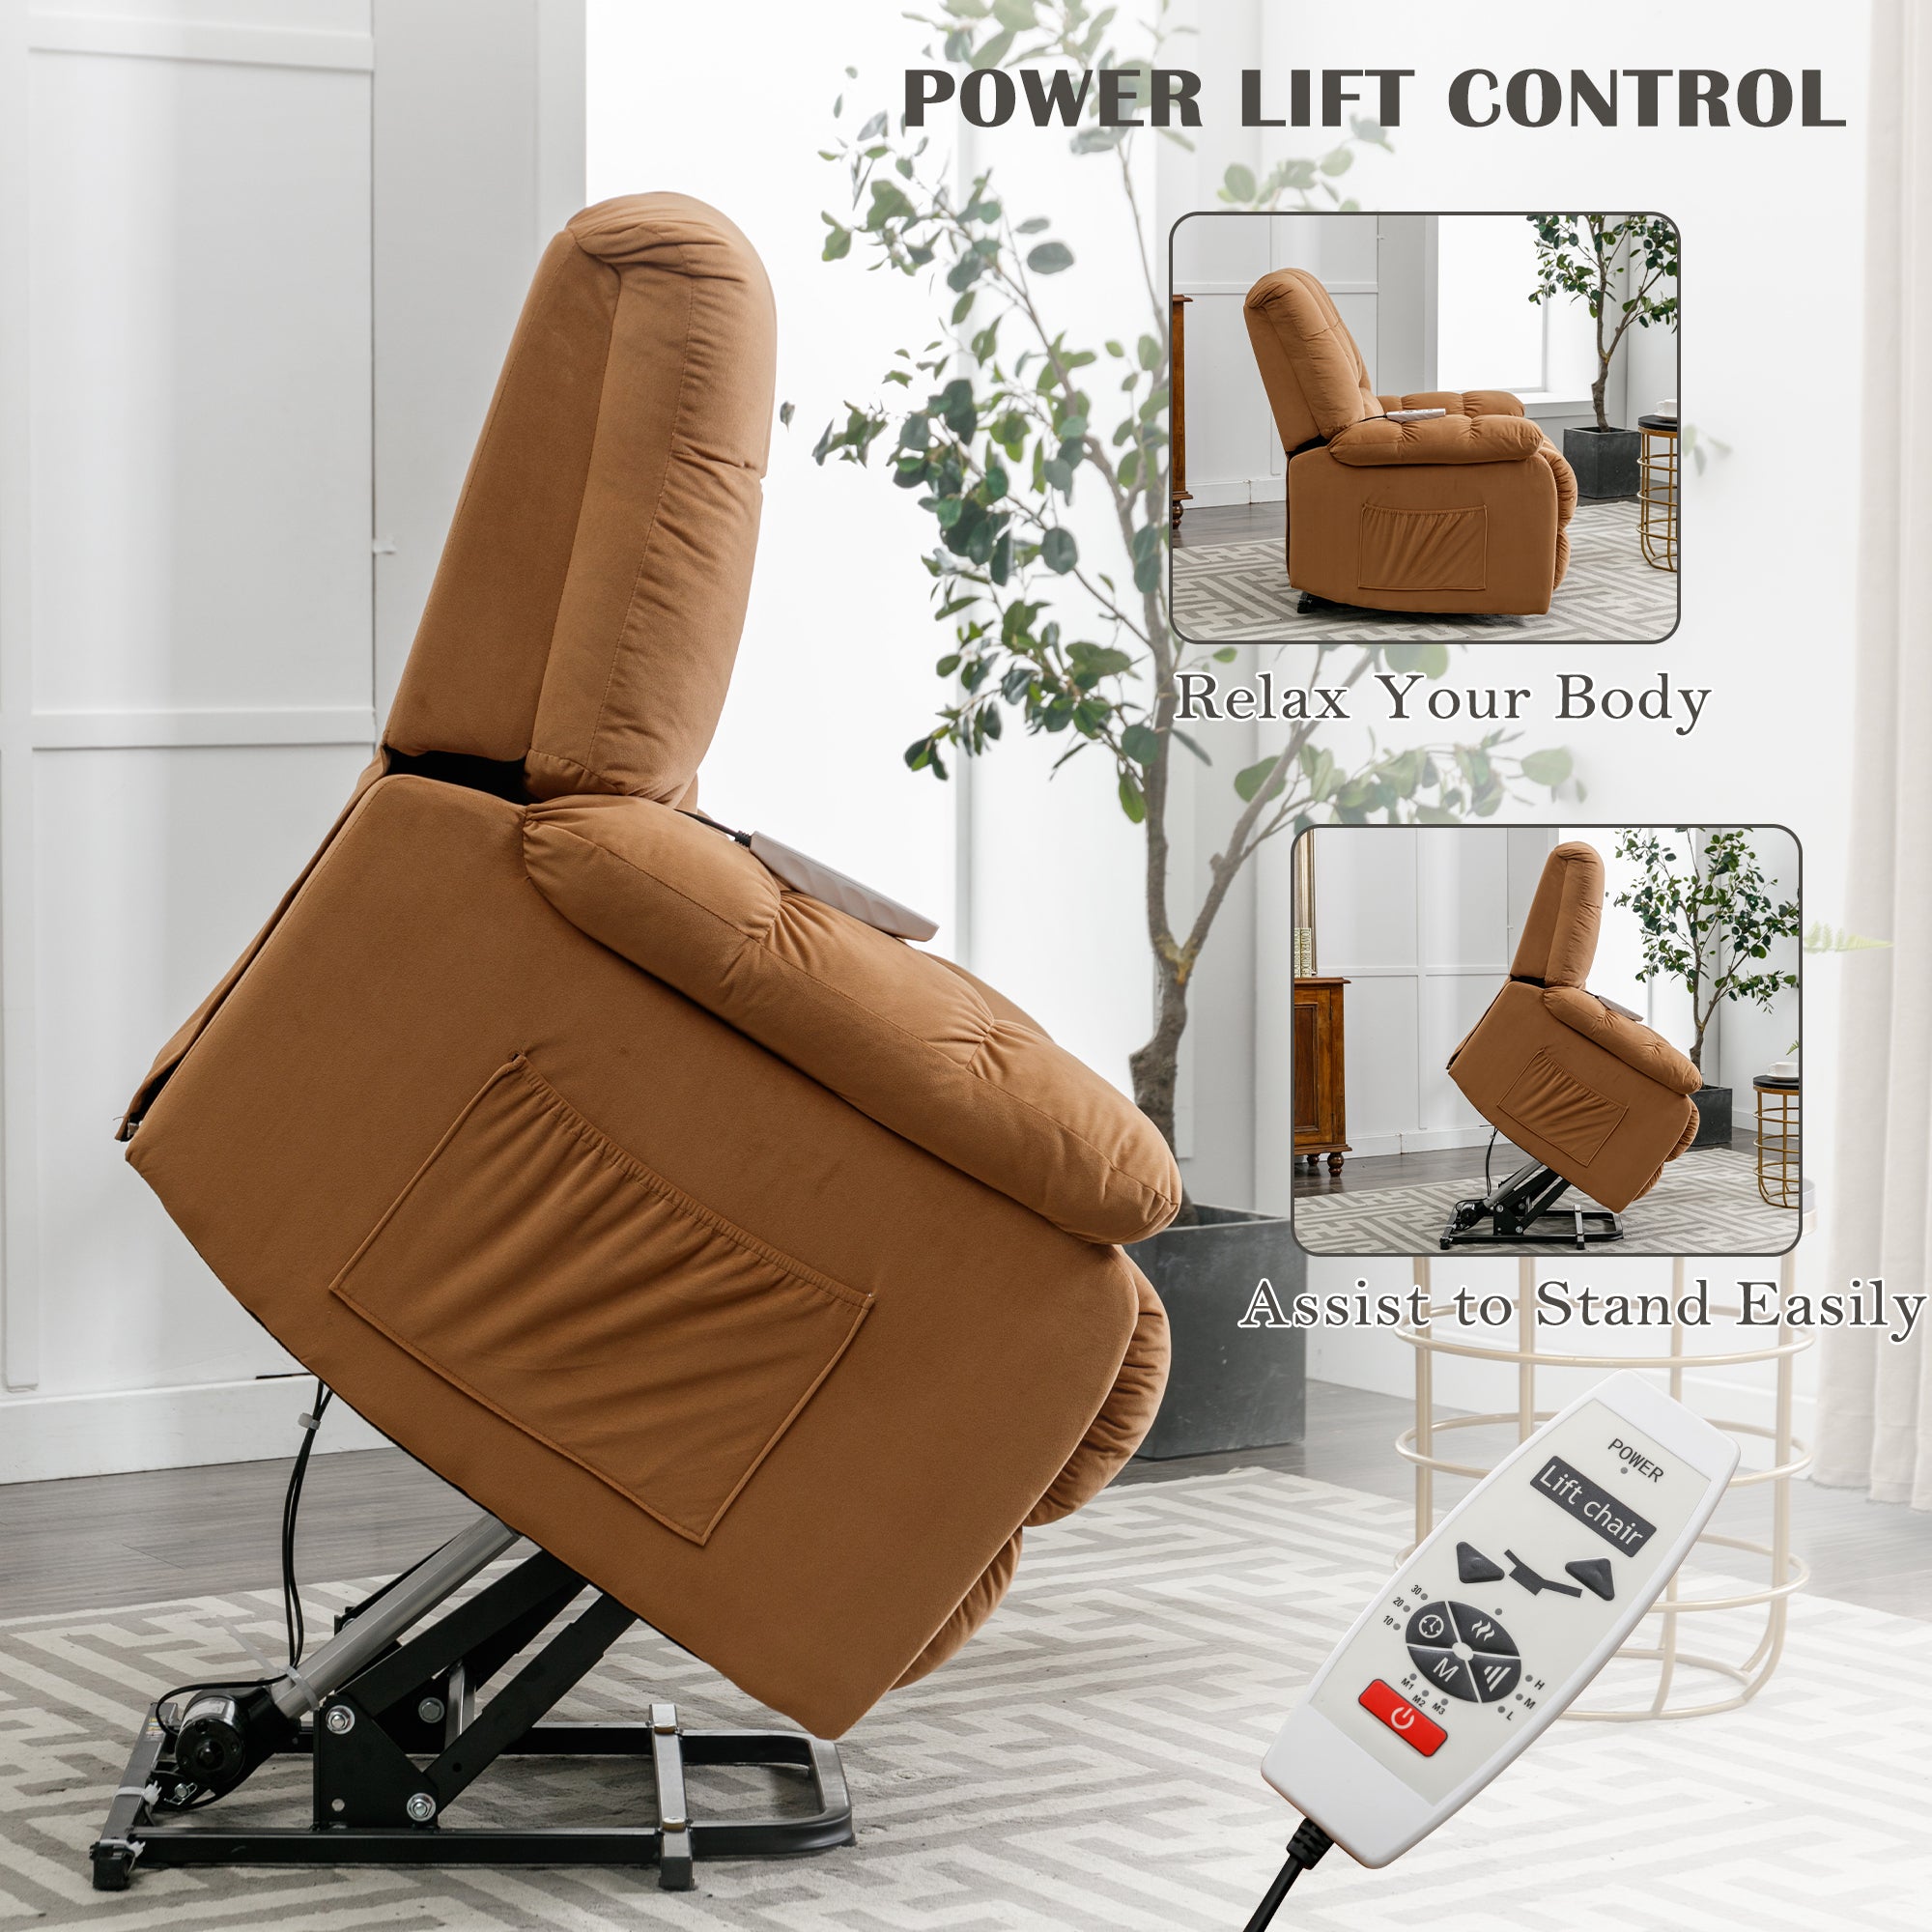 Light Brown Power Lift Chair Side Profile with Power Lift Remote